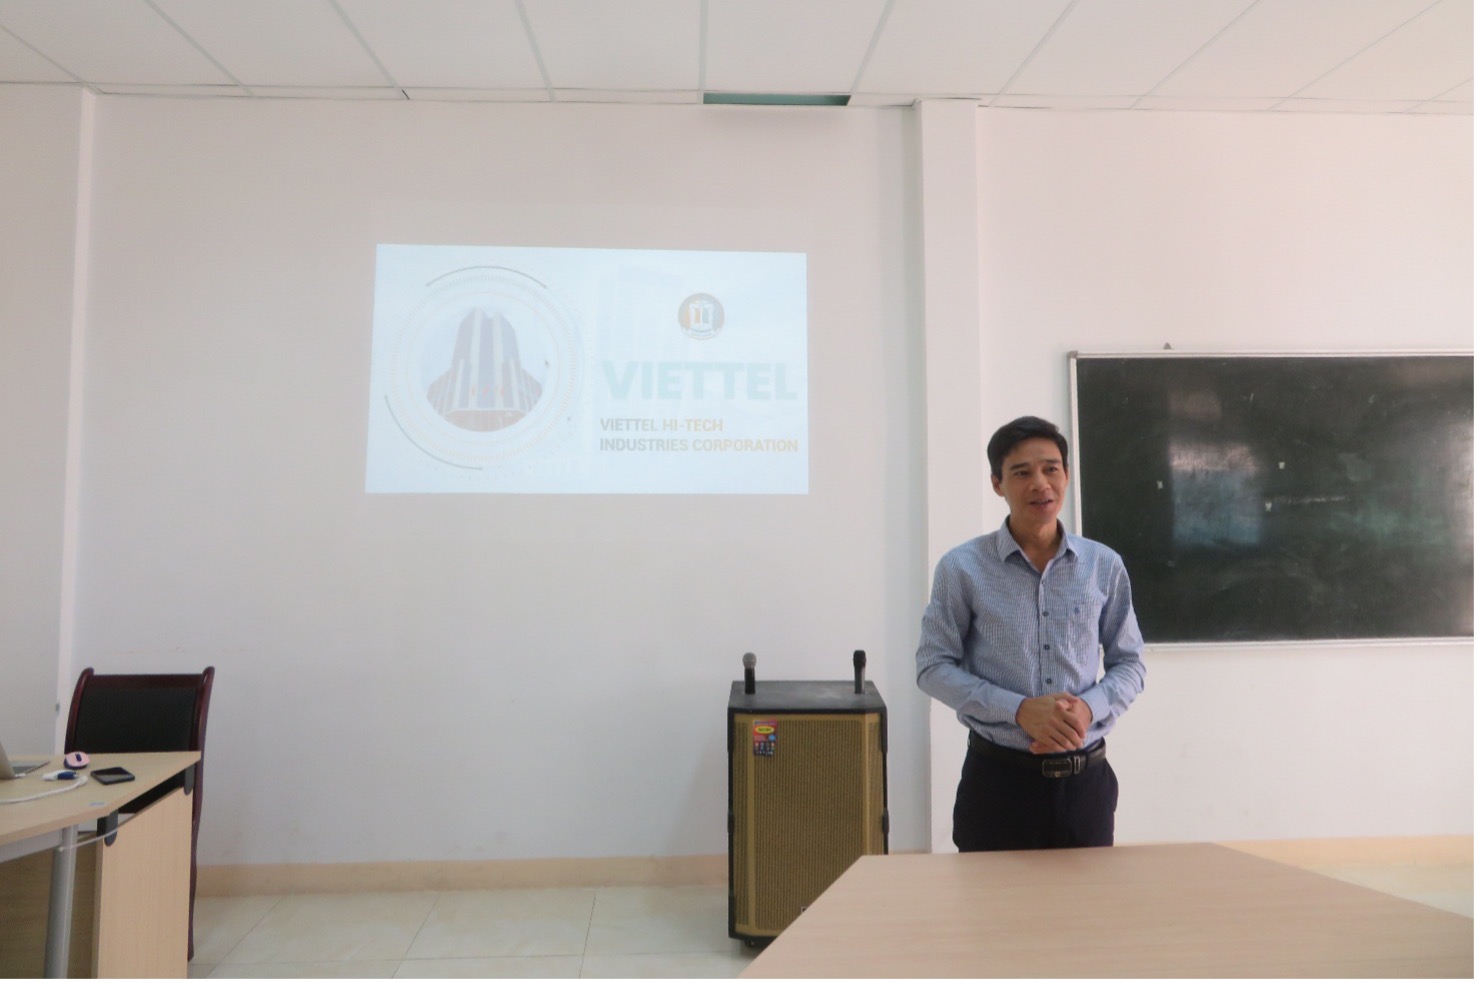 Technology Center - Viettel Hi-Tech Industries Corporation held a seminar on 5G network technology and recruited students from the Faculty of Advanced Science and Technology for